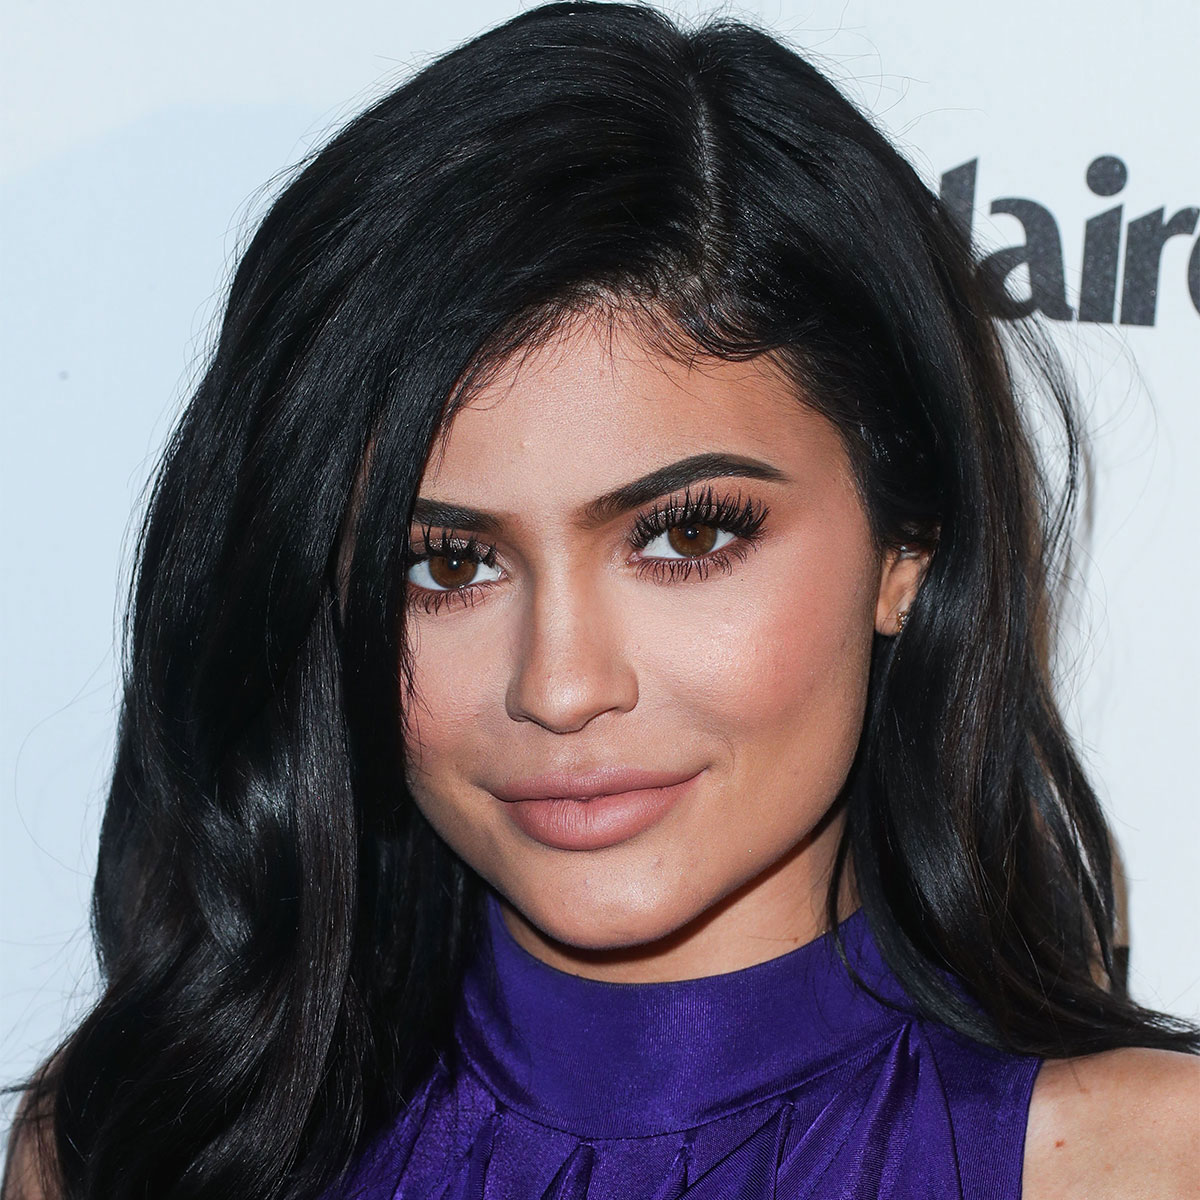 Kylie Jenner's Style File: Each One Of Kylie Jenner's Looks